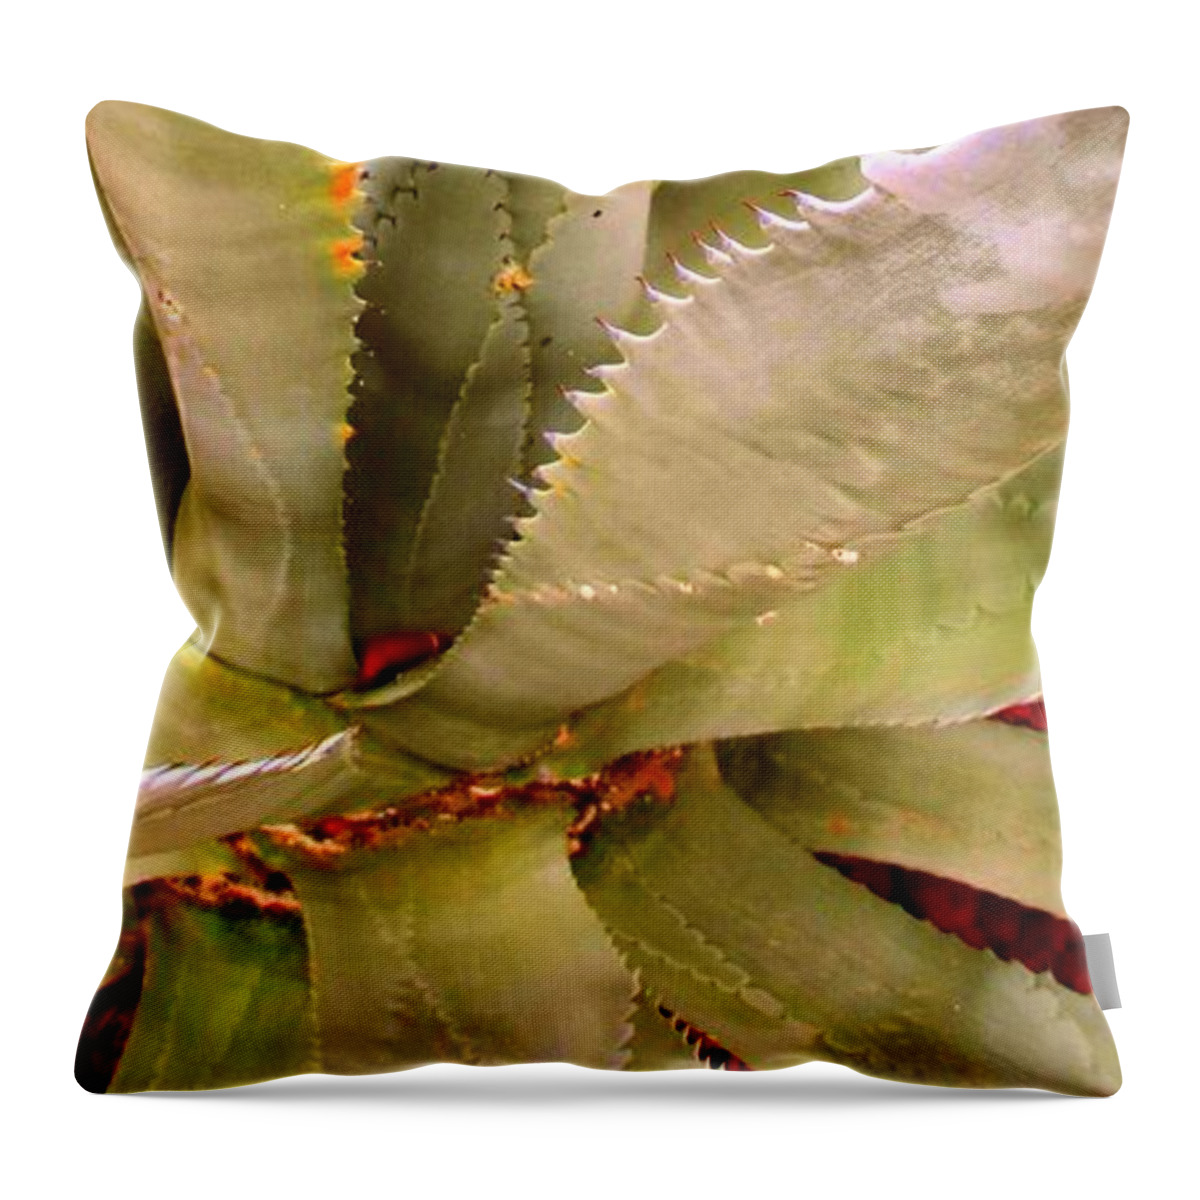  Throw Pillow featuring the photograph Agave by Donna Spadola